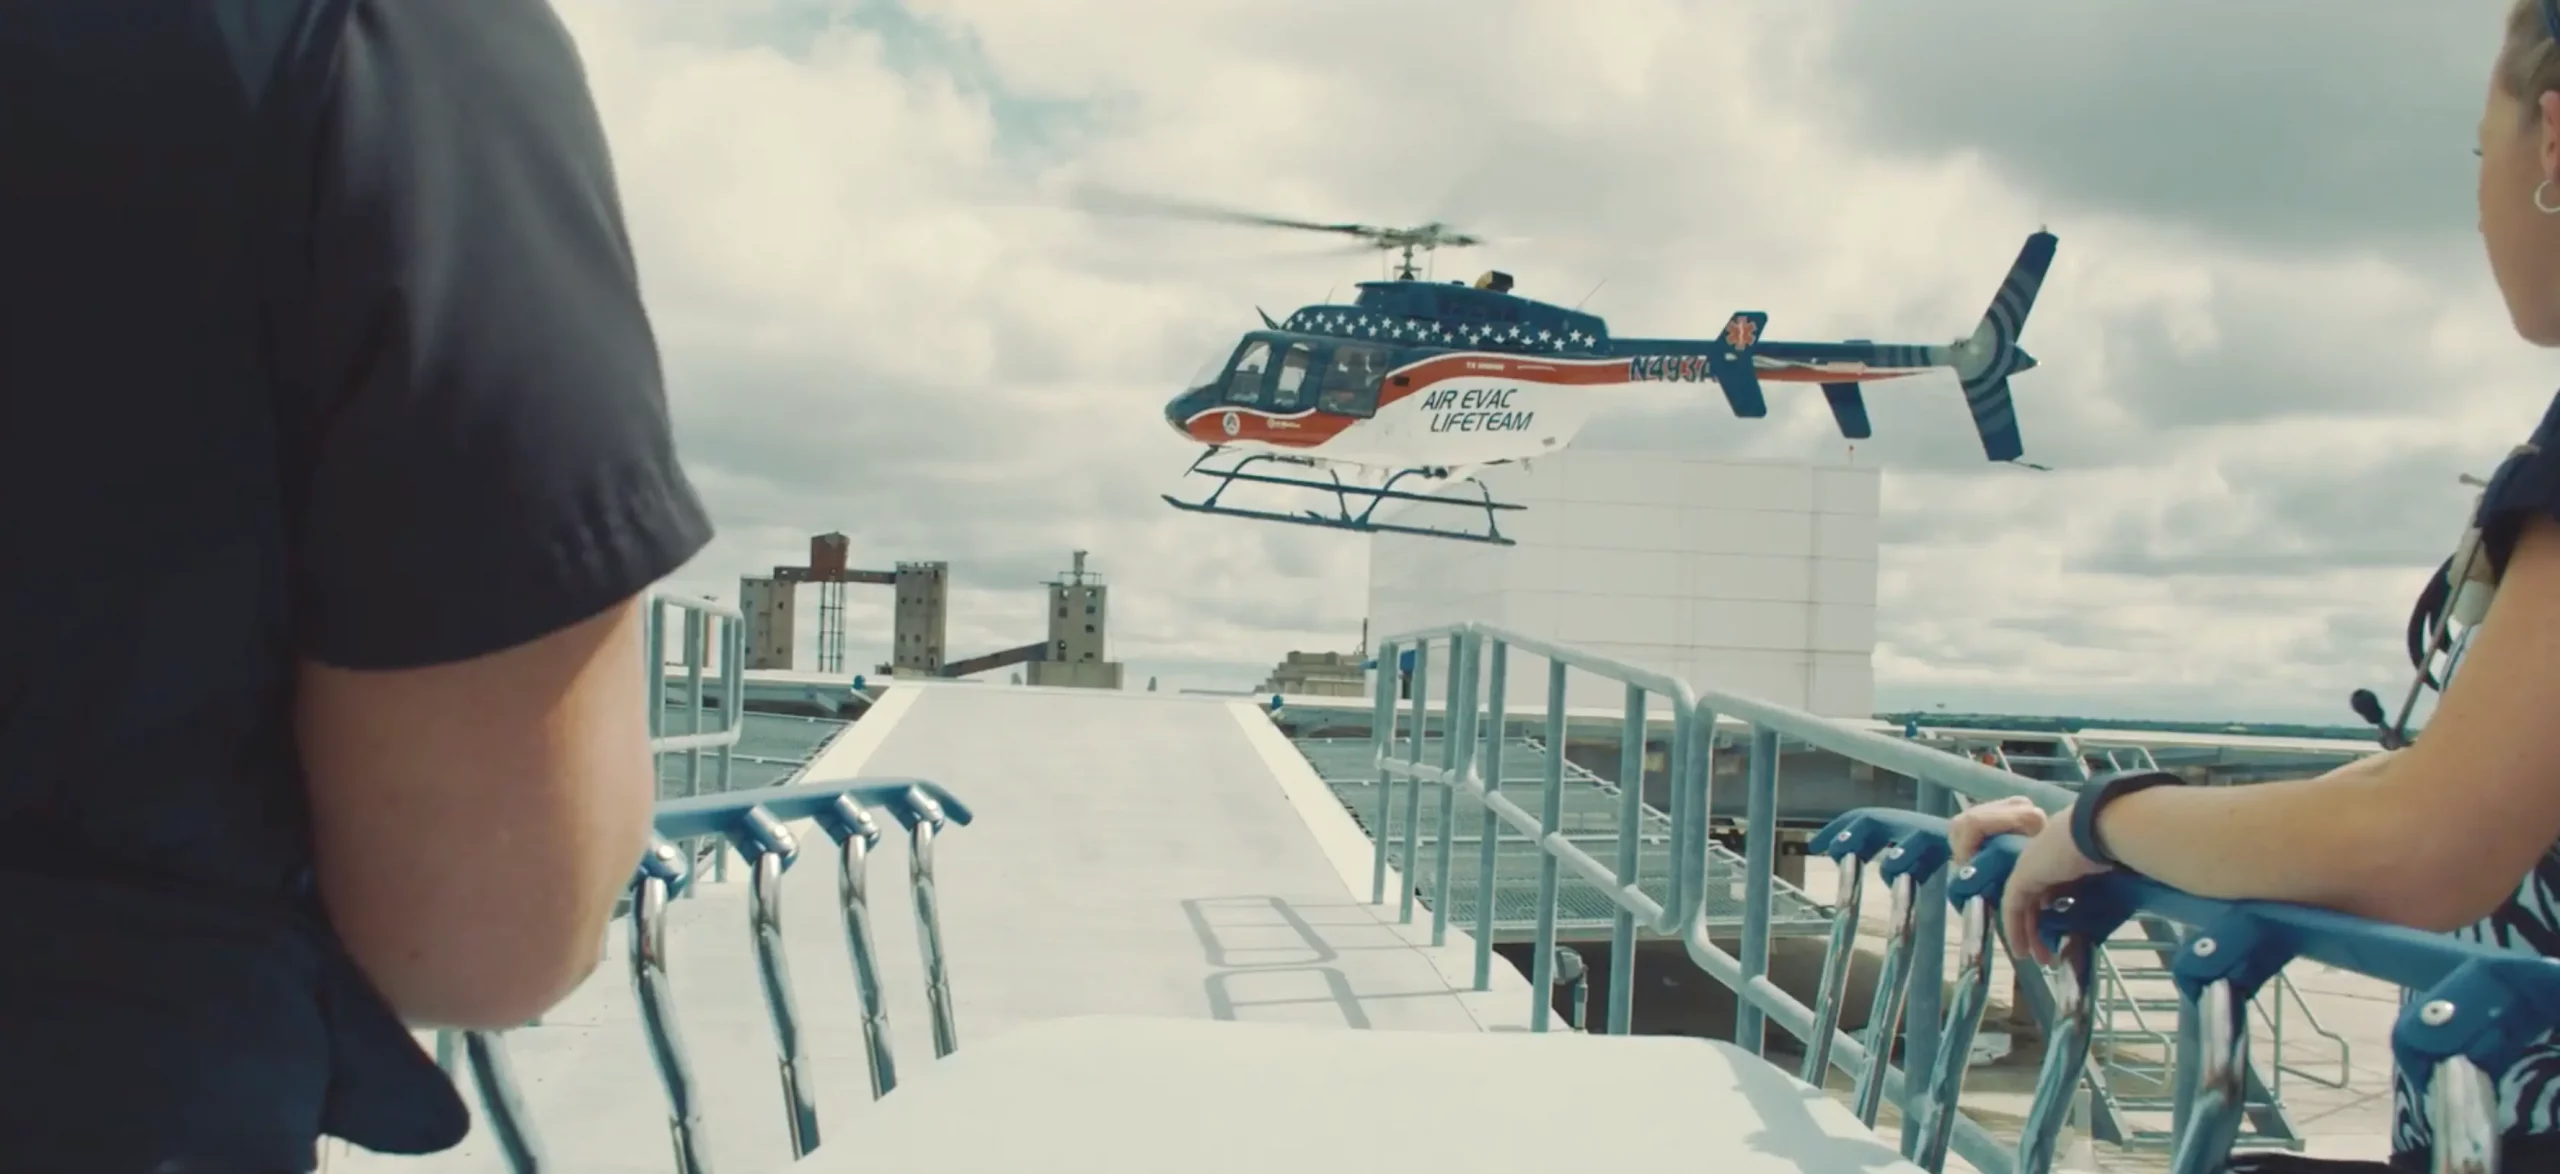 Behind the scenes of a medical video production set with a medical rescue helicopter landing on a barge.